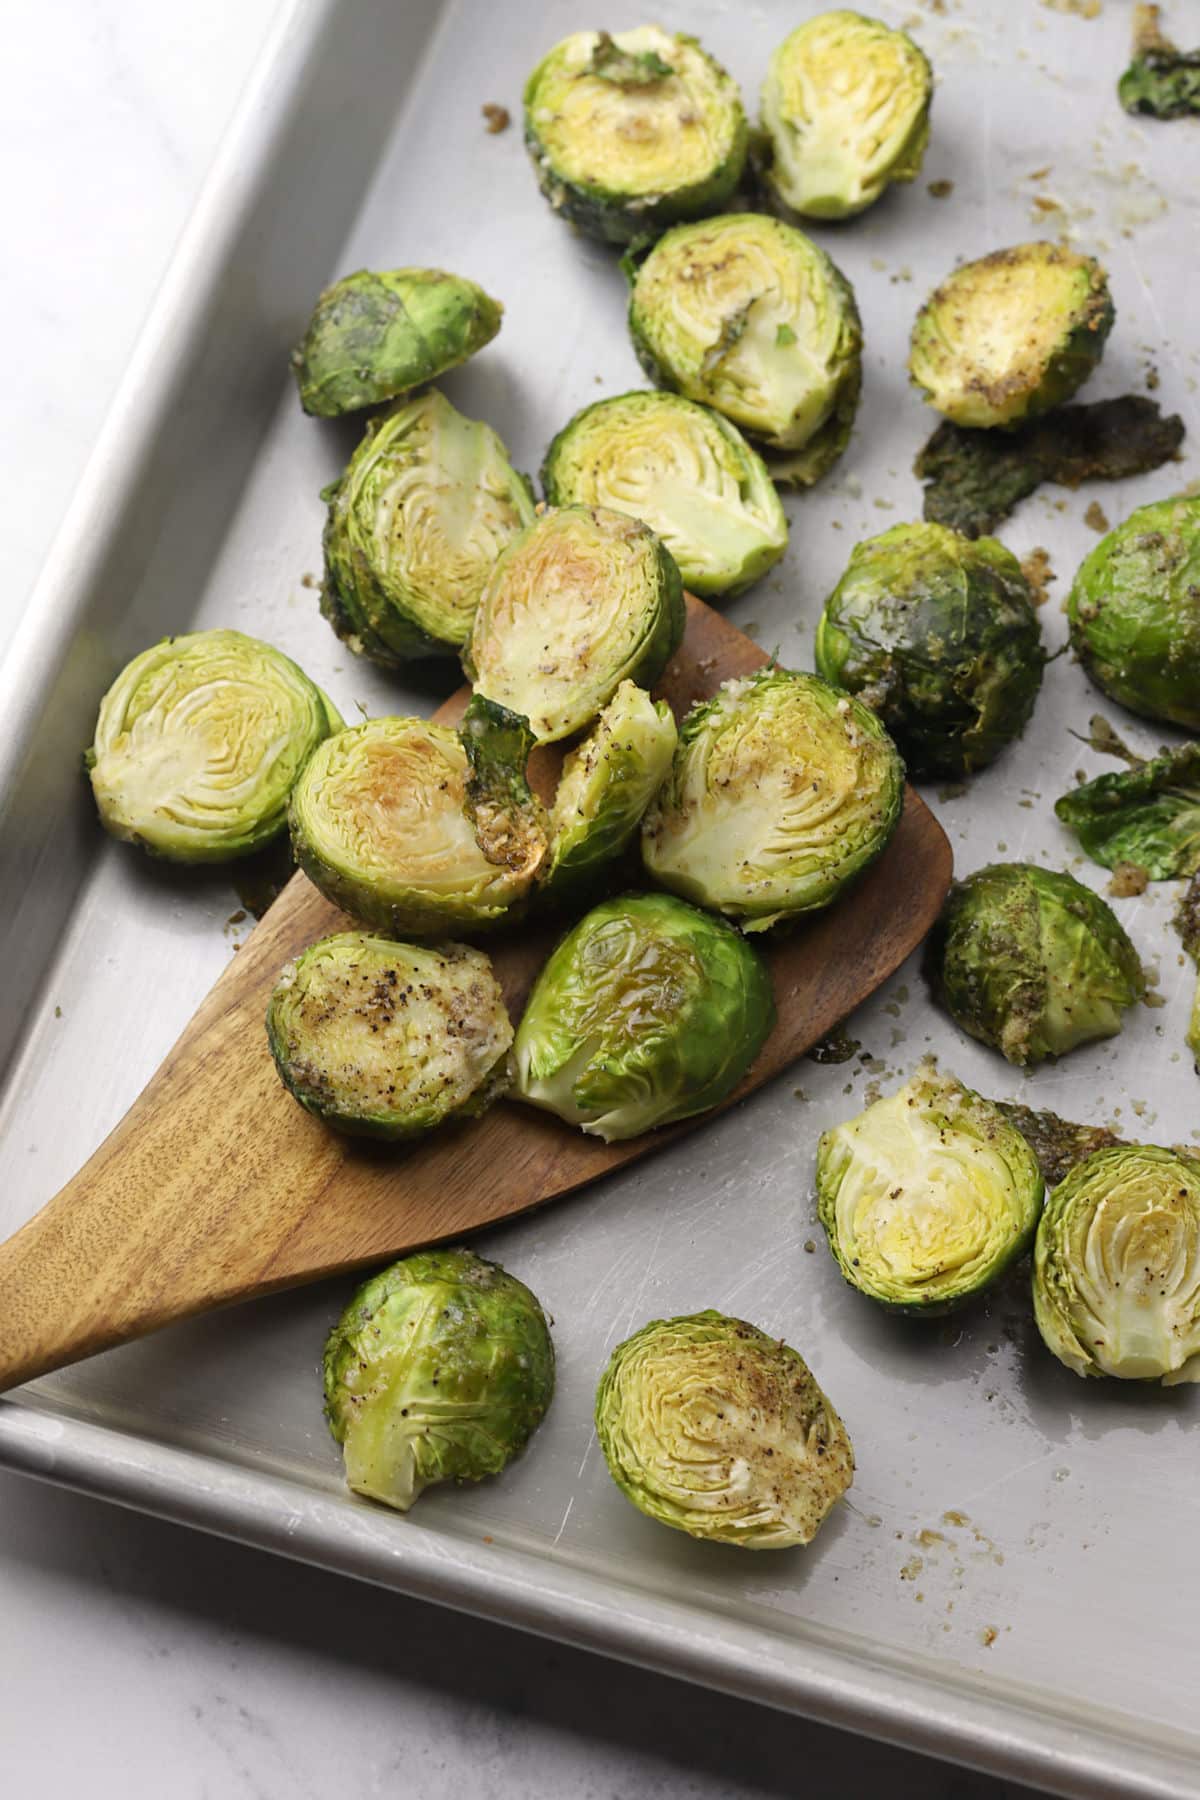 Wooden spatula scooping brussels sprouts from a sheet pan.